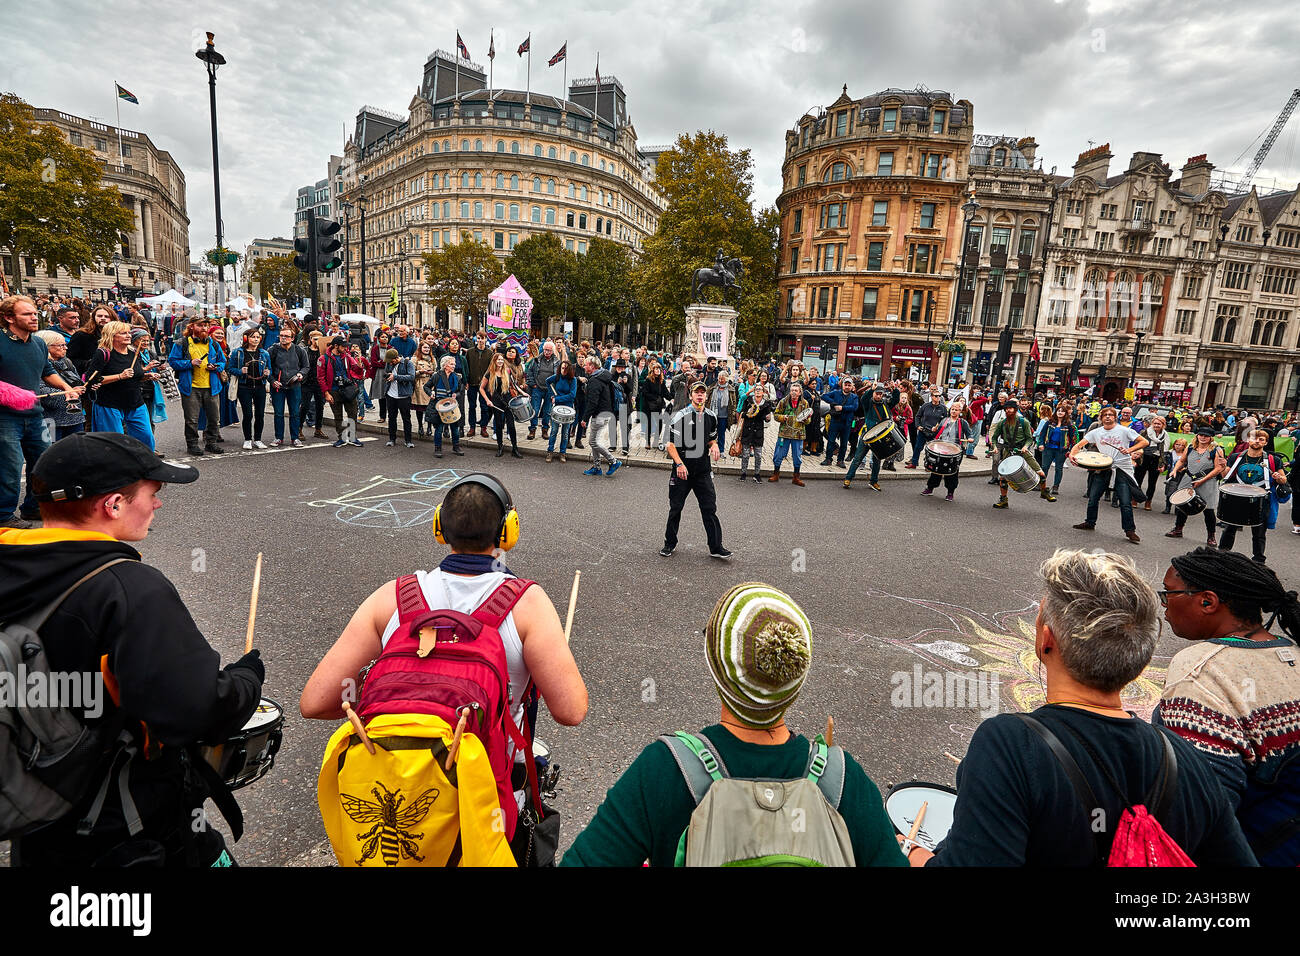 London, U.K. - Oct 8, 2019: A man leads drummers in an impromptu display on the second day of an occupation of Trafalgar Square by campaigners from Extinction Rebellion. Stock Photo